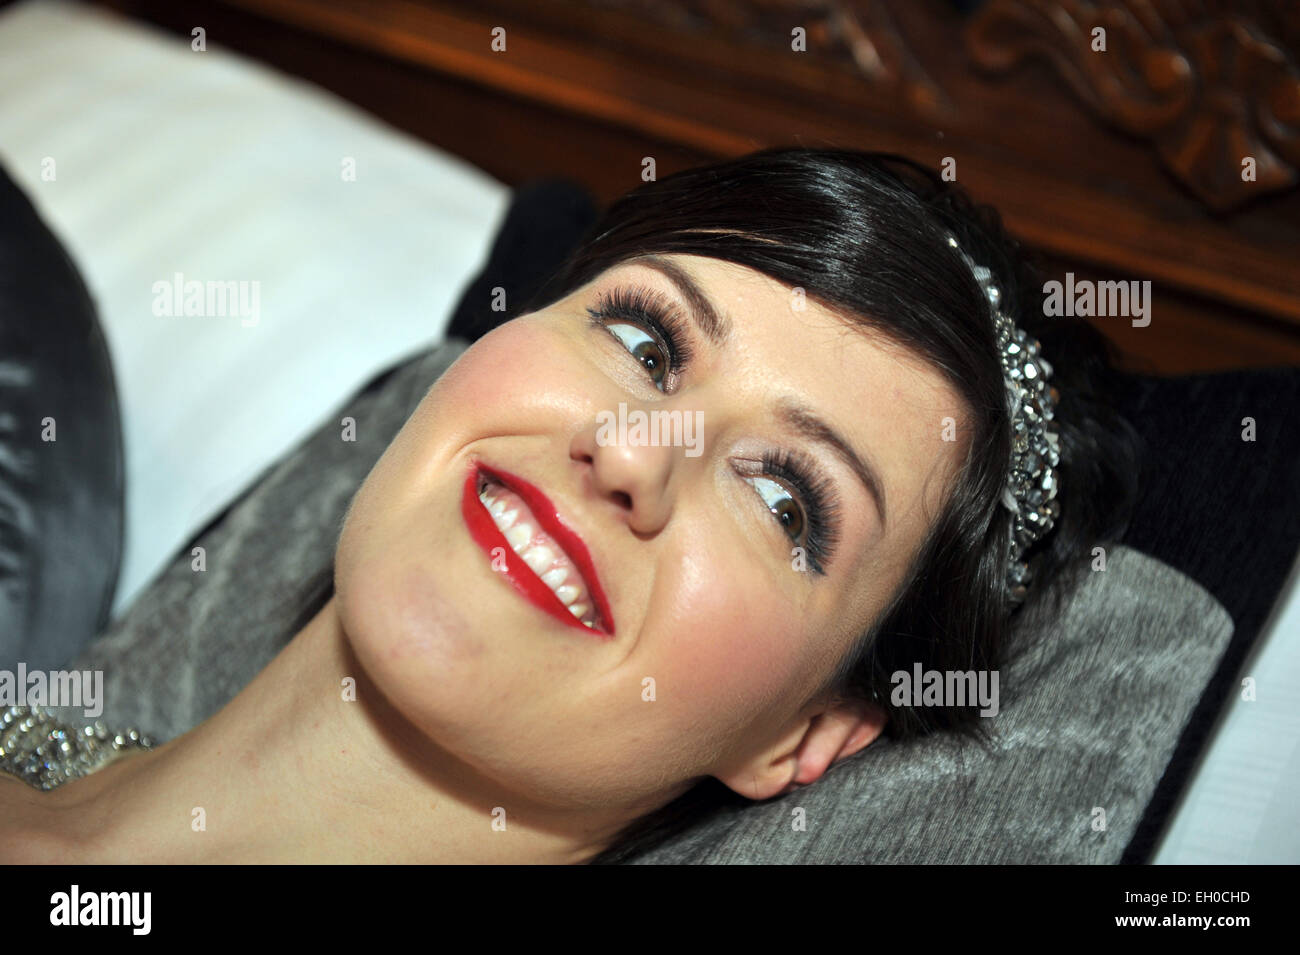 women with full makeup lying on a pillow smiling MODEL RELEASED Stock Photo